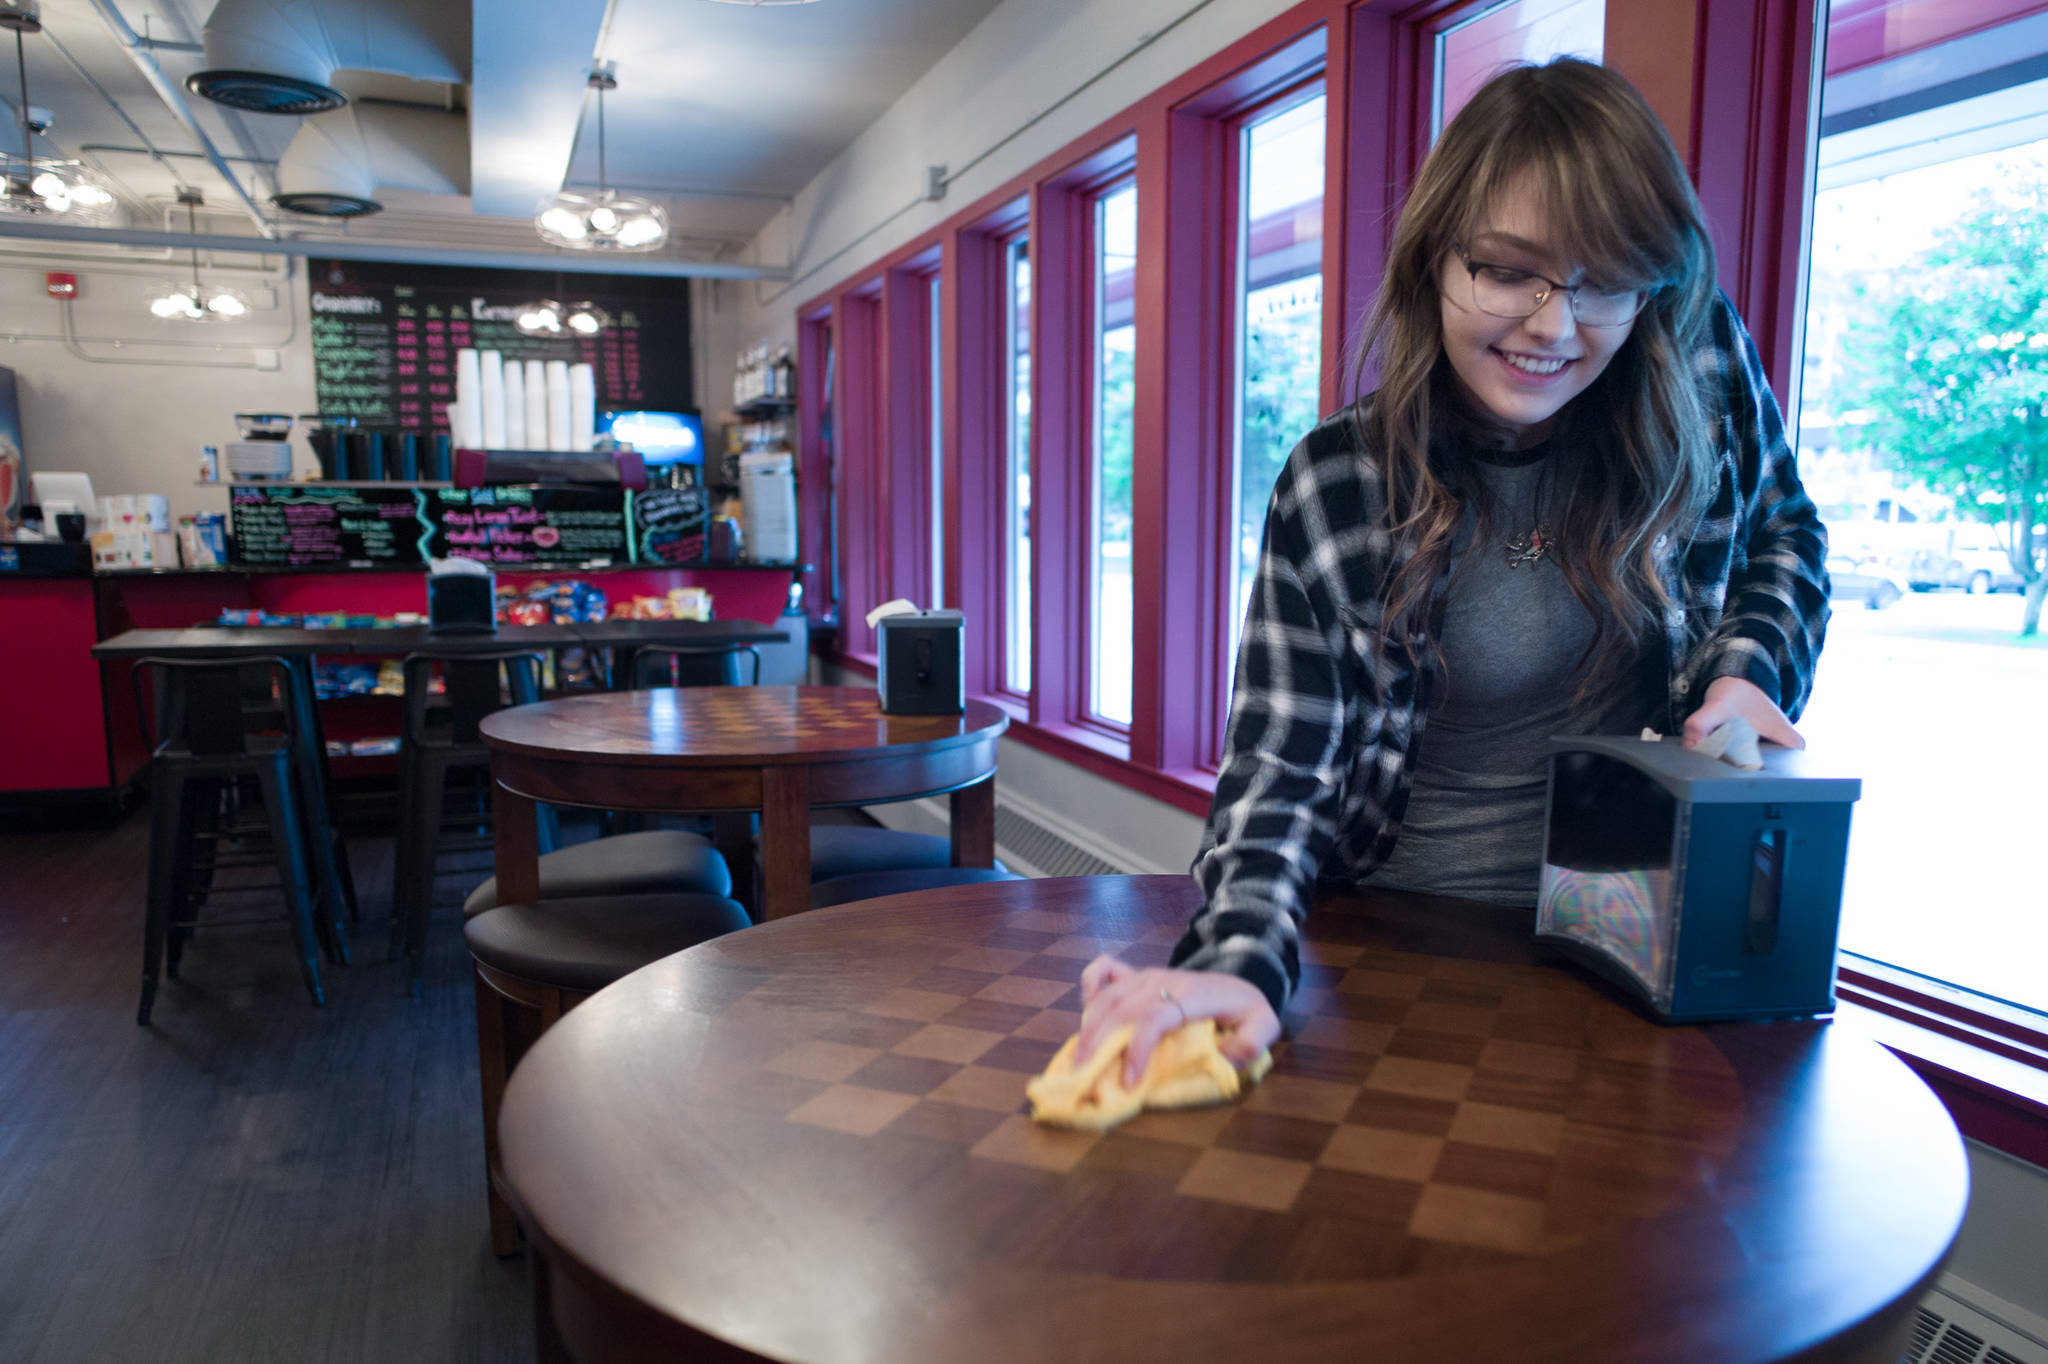 Alison Schoonover cleans up after the noon rush at a new coffee shop called Sacred Grounds located inside the Andrew Hope Building on Tuesday, July 18, 2017. (Michael Penn | Juneau Empire)